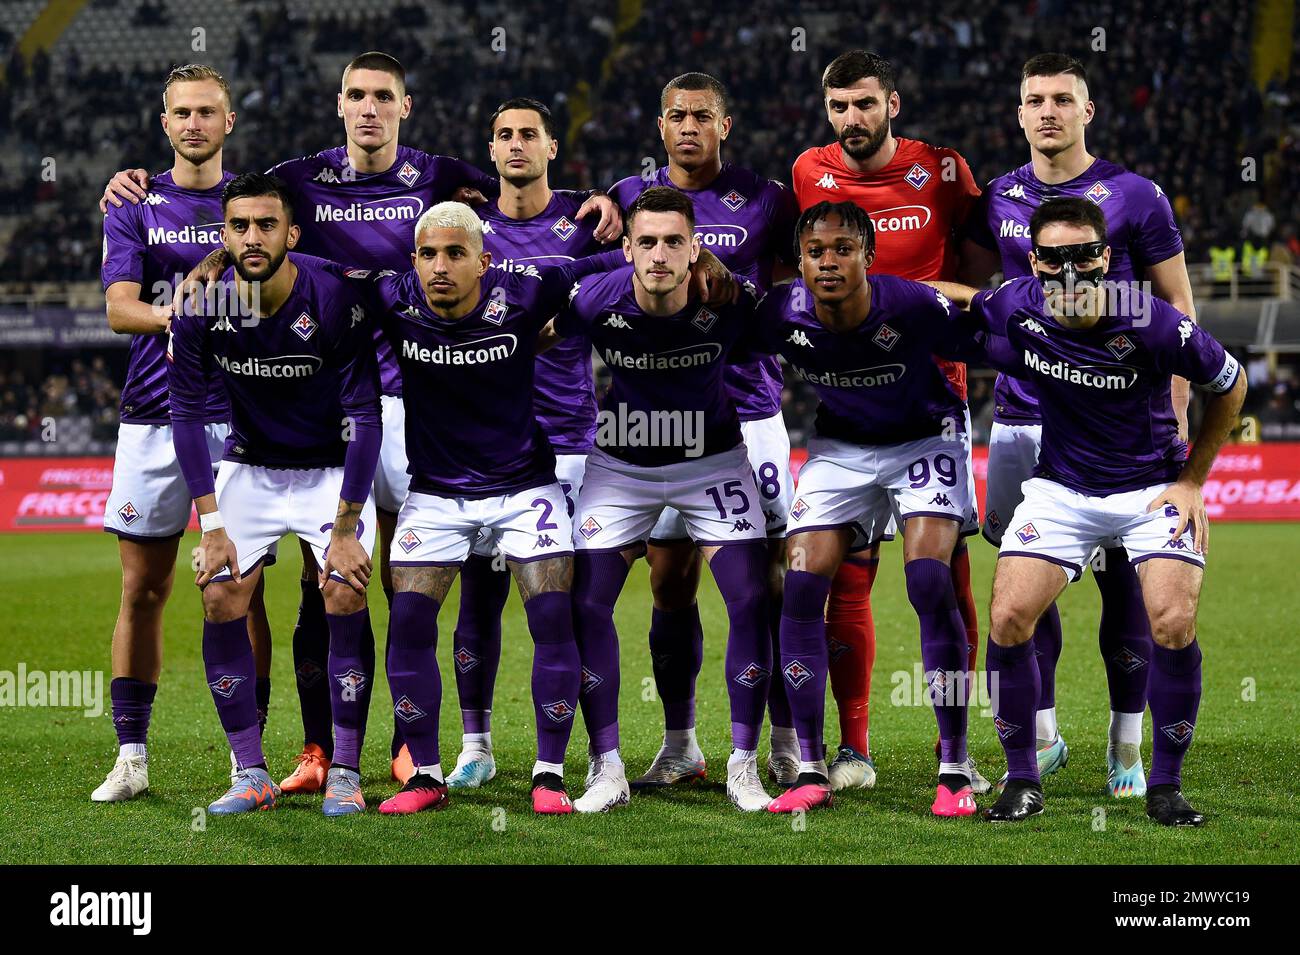 Florence, Italy. 01 February 2023. Players of ACF FIorentina pose for a  team photo prior to the Coppa Italia football match between ACF Fiorentina  and Torino FC. Credit: Nicolò Campo/Alamy Live News